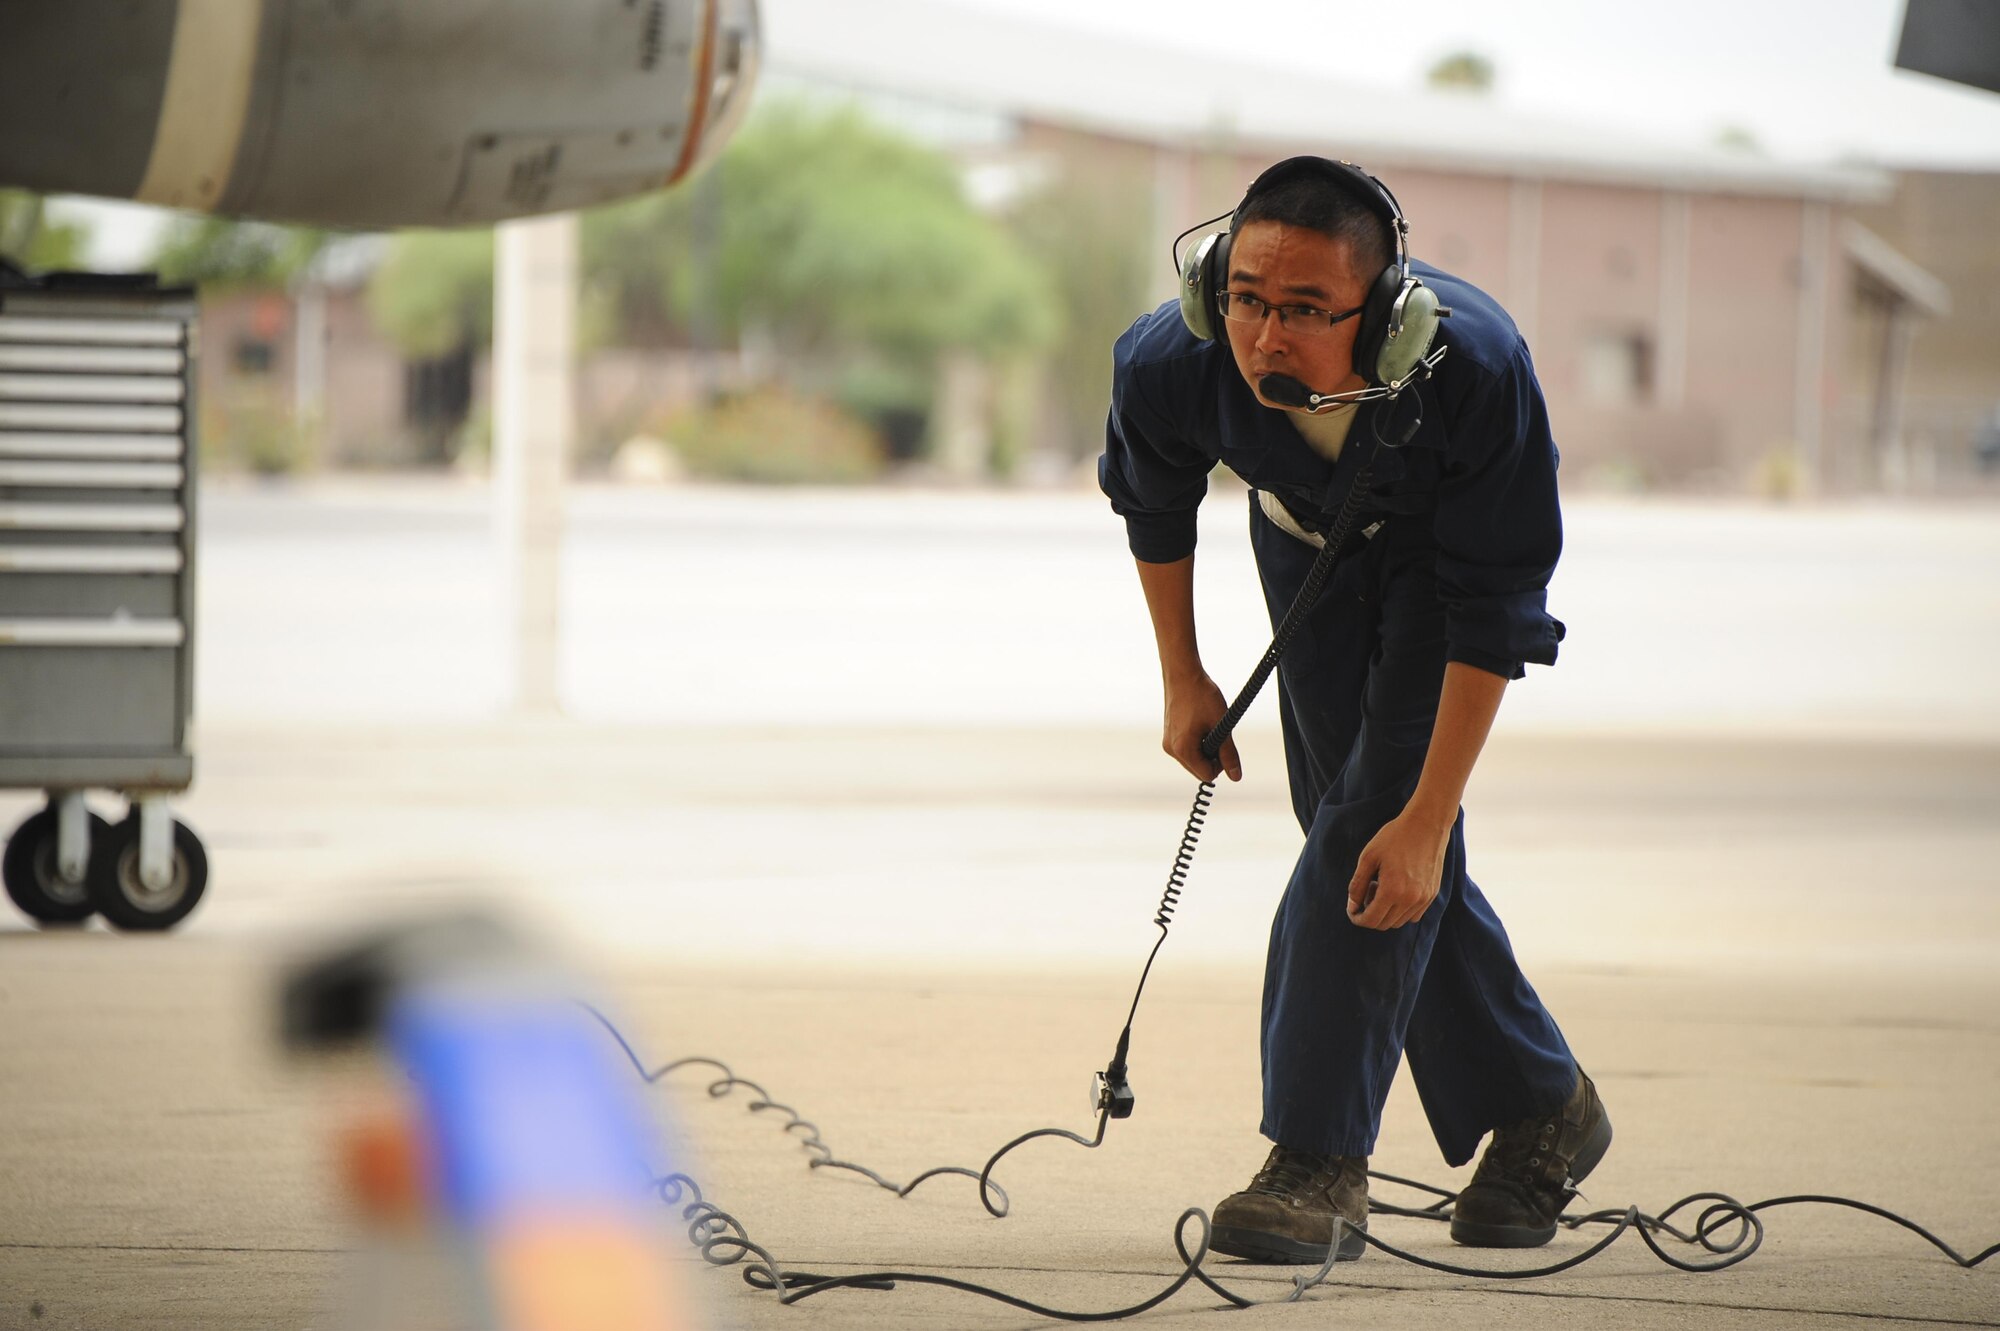 U.S. Air Force Senior Airman Andy Bui, 355th Aircraft Maintenance Squadron A-10C Thunderbolt II crew chief, inspects an A-10 on the flightline before takeoff at Davis-Monthan Air Force Base, Ariz., June 23, 2016. The 355th AMXS generates all combat and training sorties in the 355th Fighter Wing and manages the efforts of 500 Airmen in 10 specialties maintaining A-10C attack aircraft. (U.S. Air Force photo by Airman 1st Class Mya M. Crosby/Released)